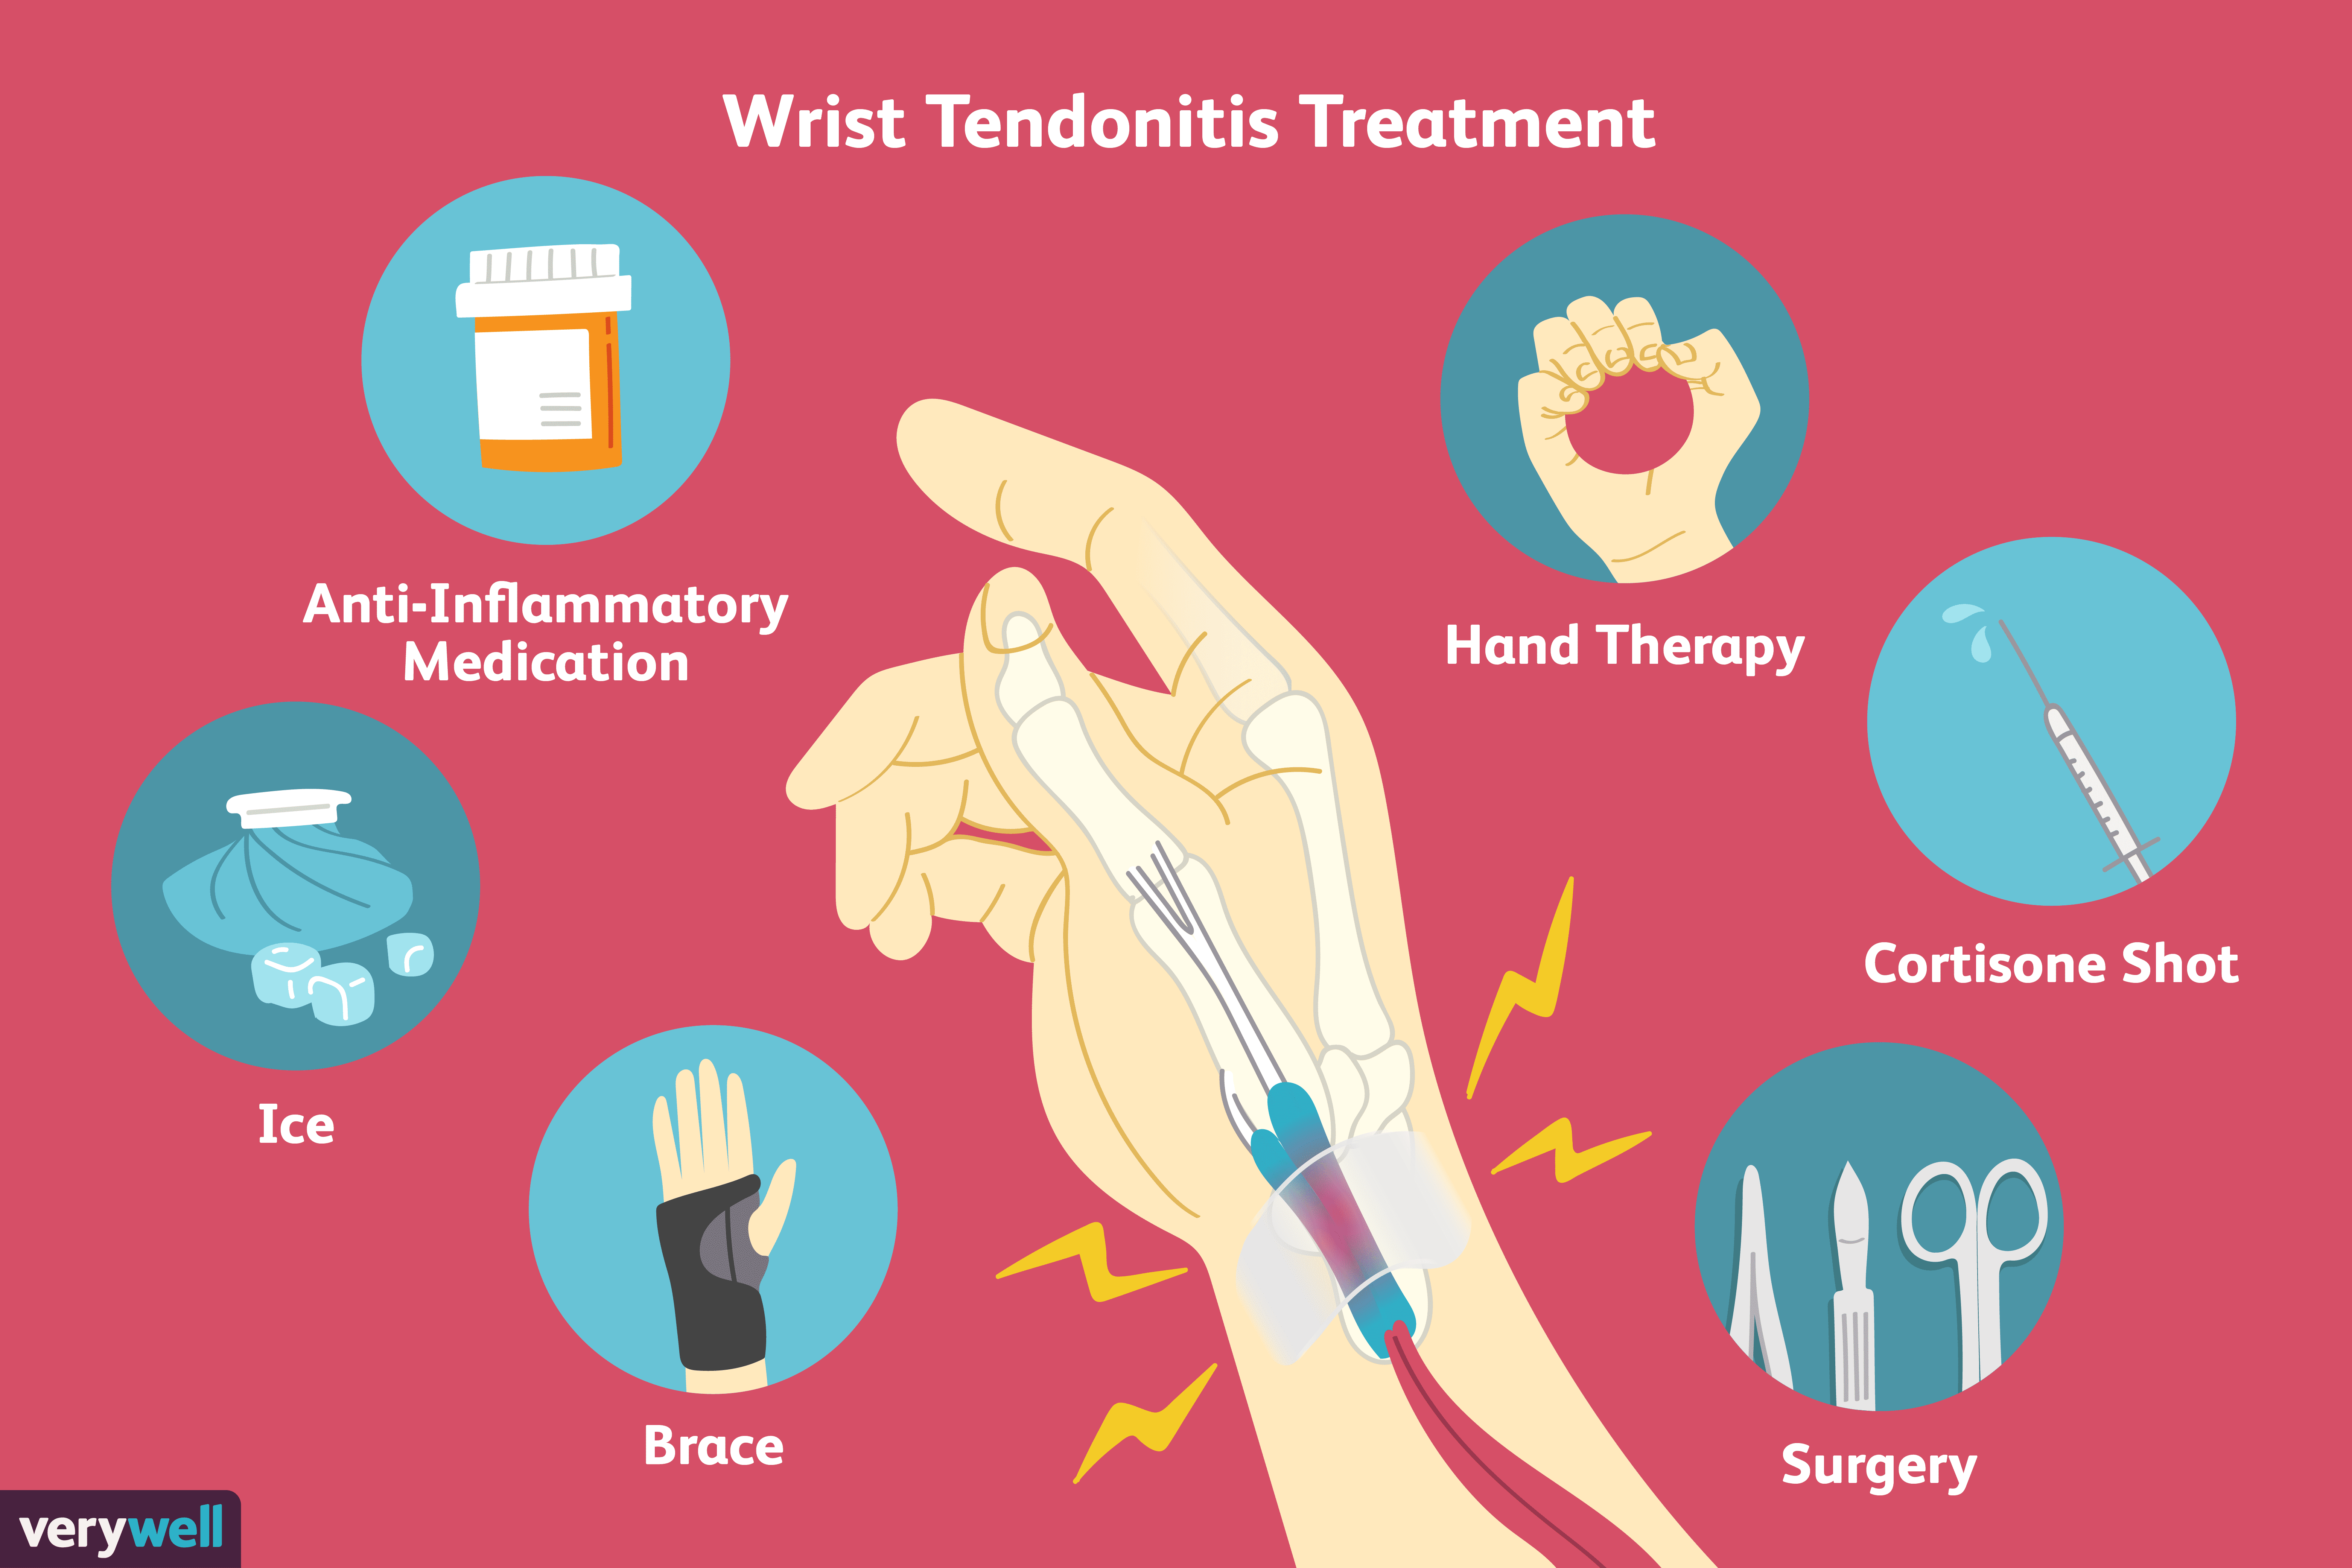 Wrist Tendonitis: Signs, Causes, and Treatments